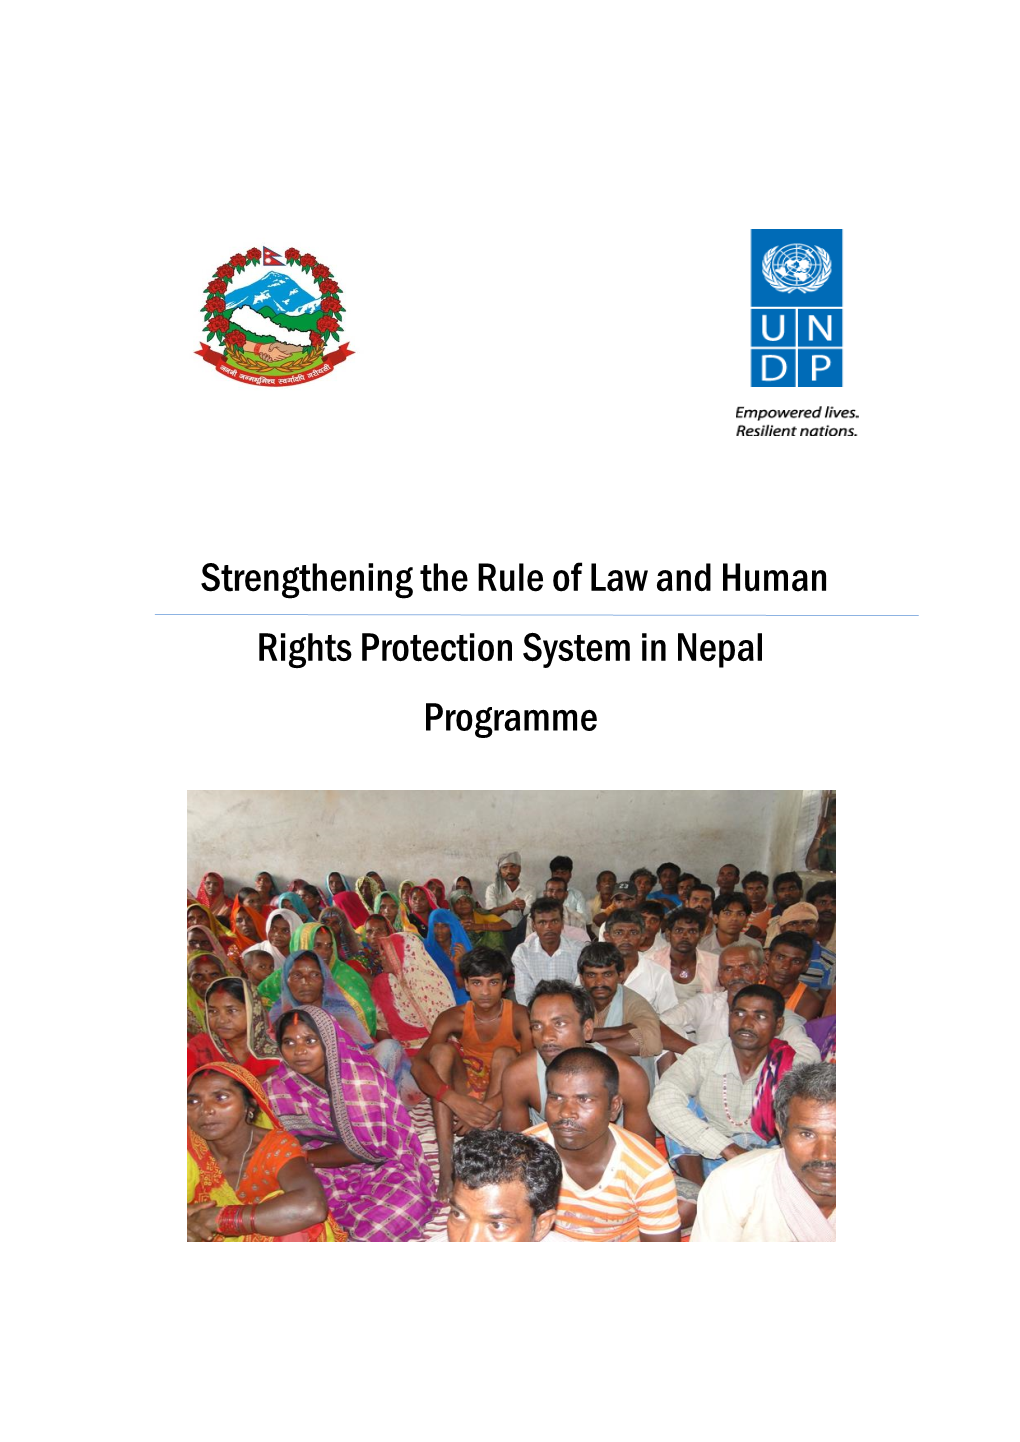 Strengthening the Rule of Law and Human Rights Protection System in Nepal Programme